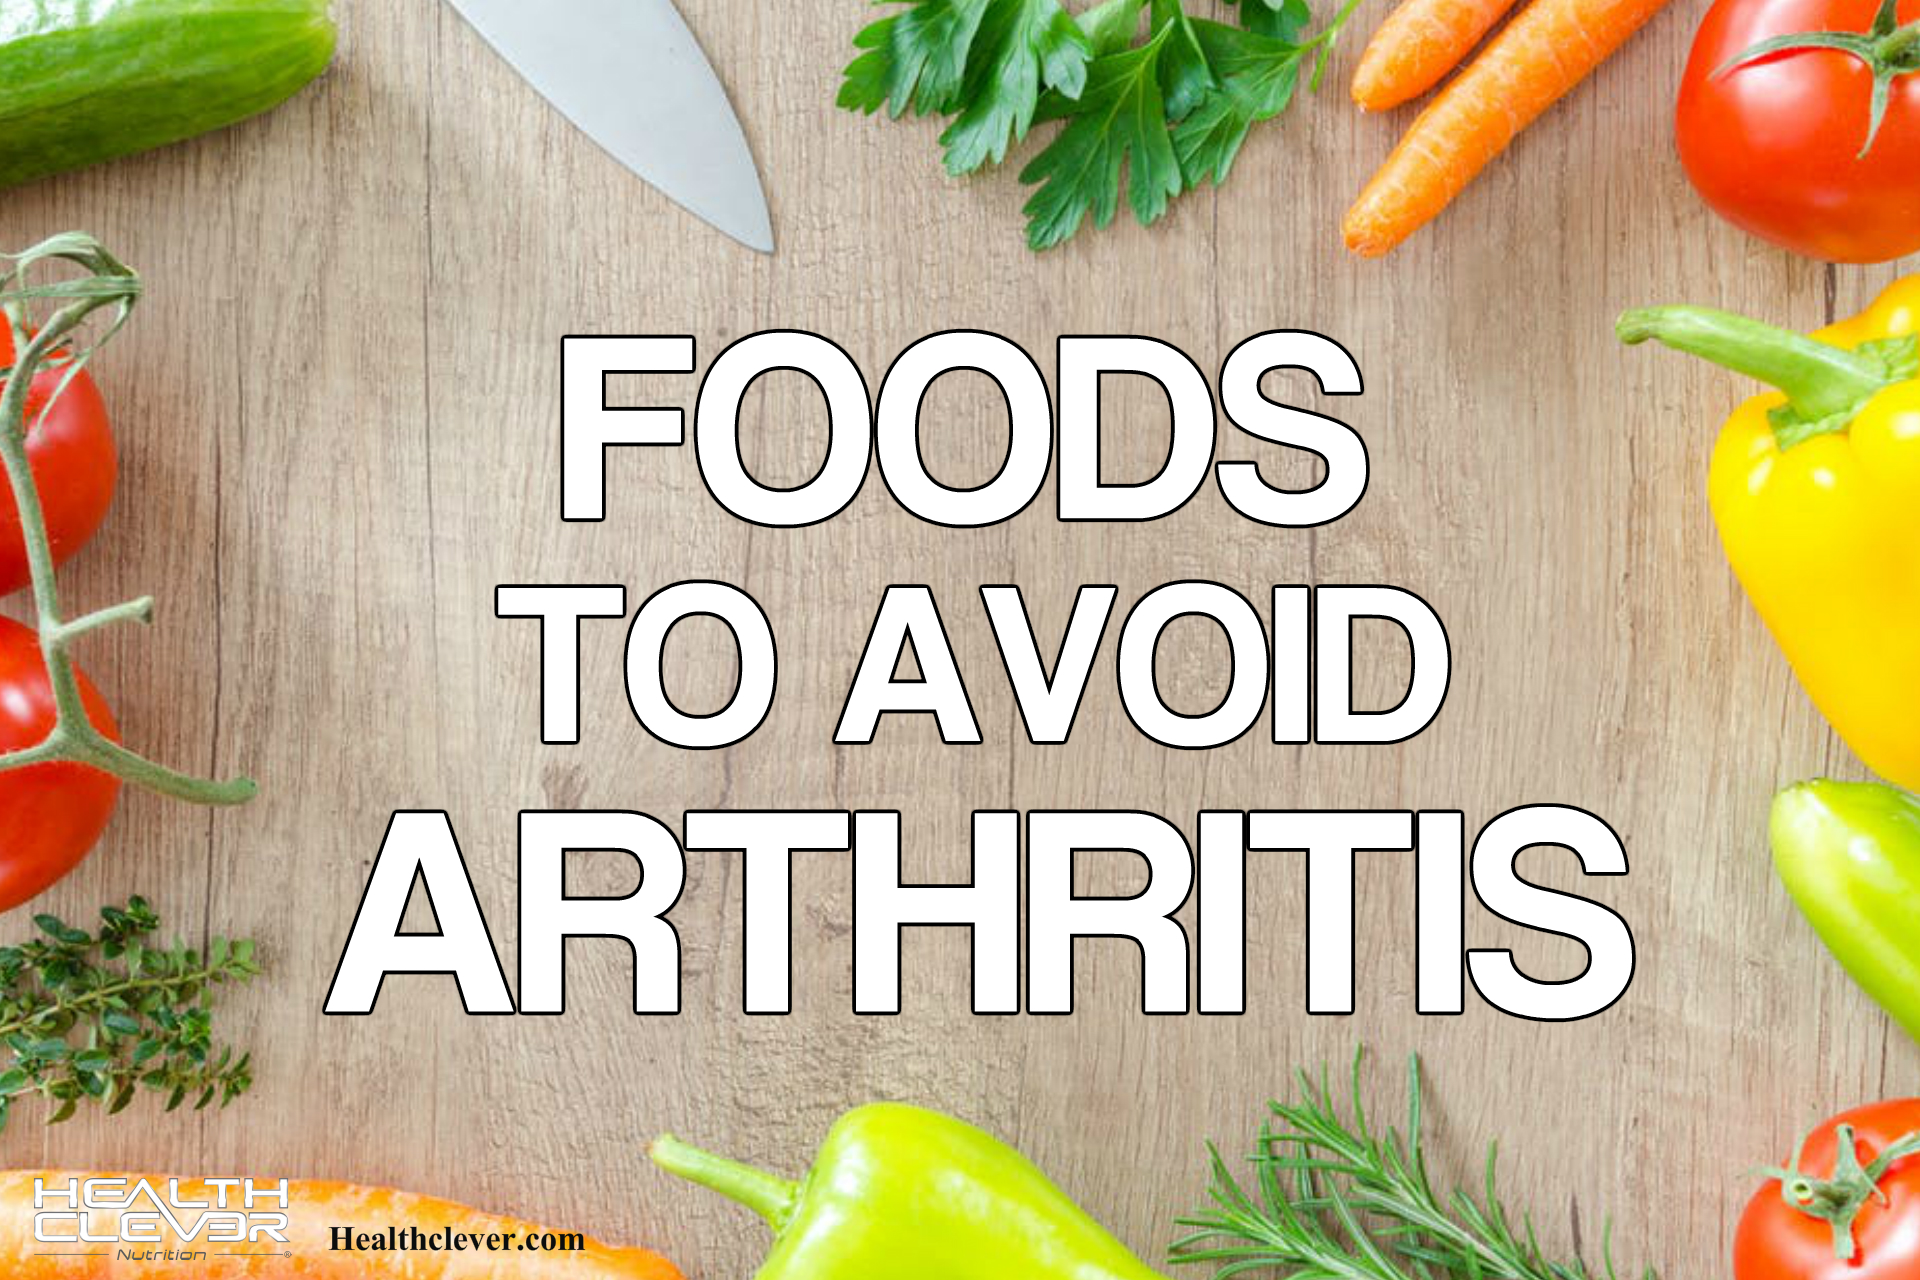 Foods to Avoid Arthritis - Small Changes Make a Big Difference